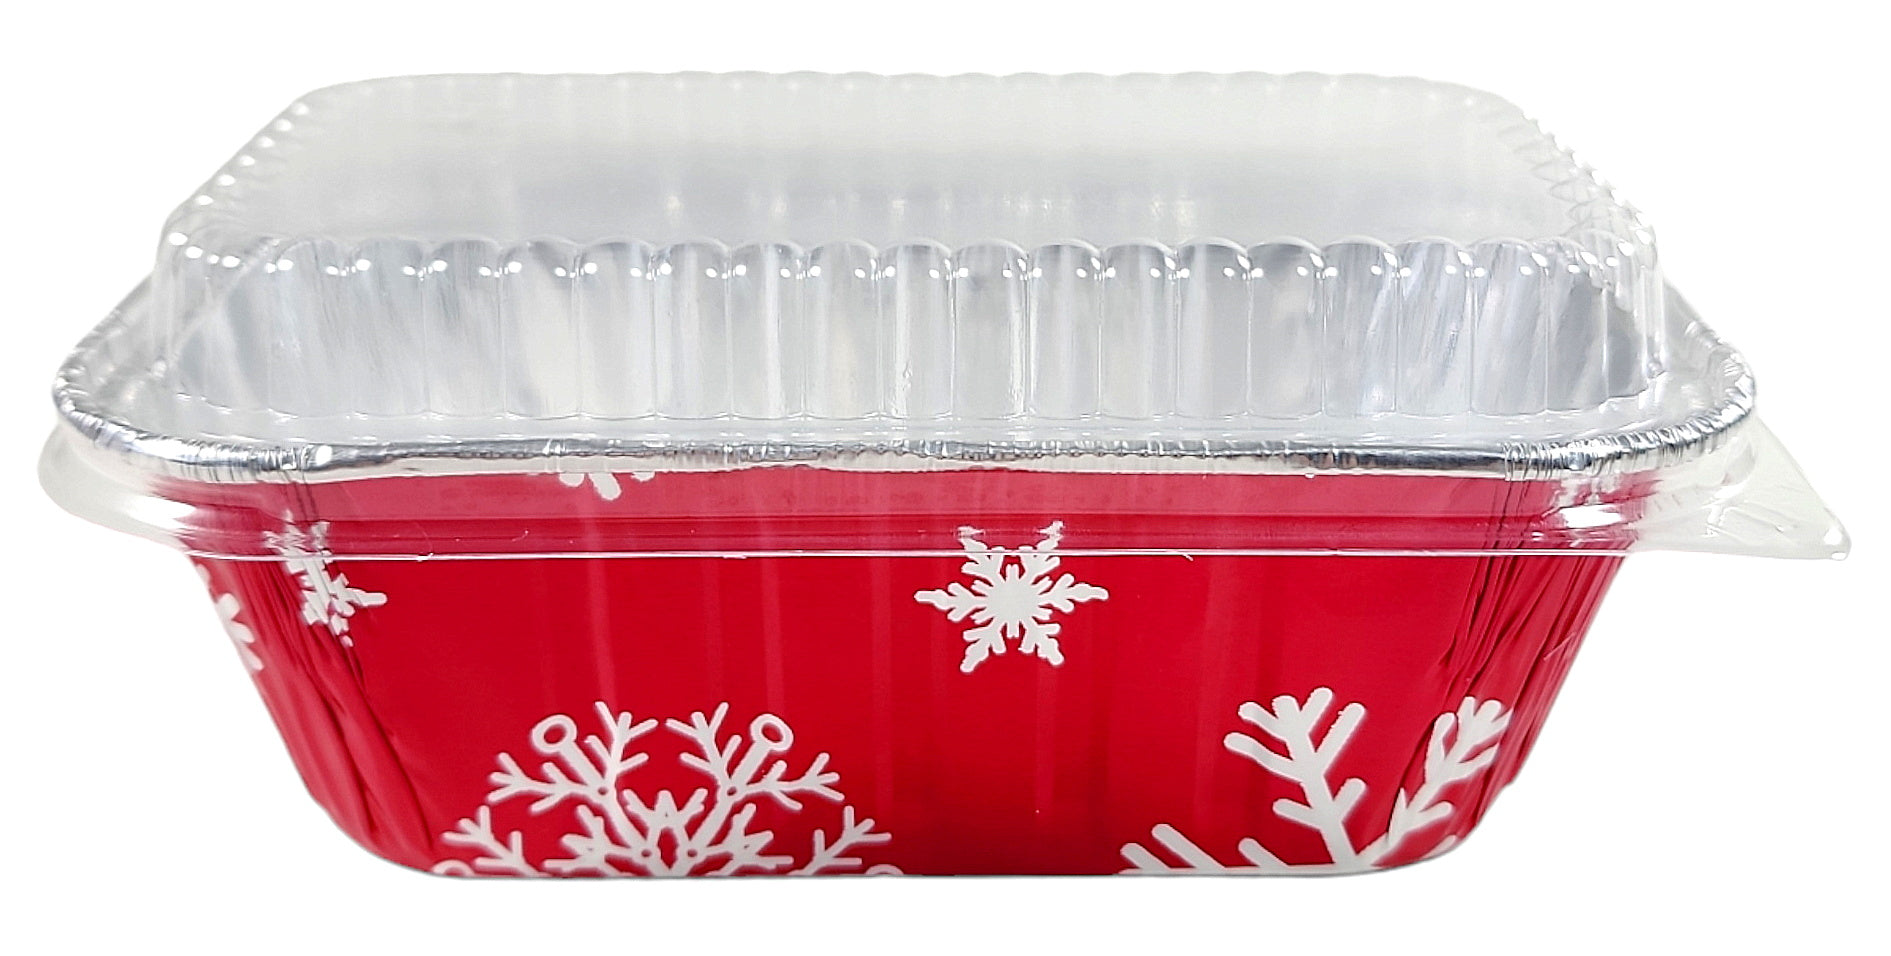 Pactogo 1 lb. Red Aluminum Foil Holiday Mini-Loaf Snowflake Pan w/Clear Low Dome Lid 200/CS